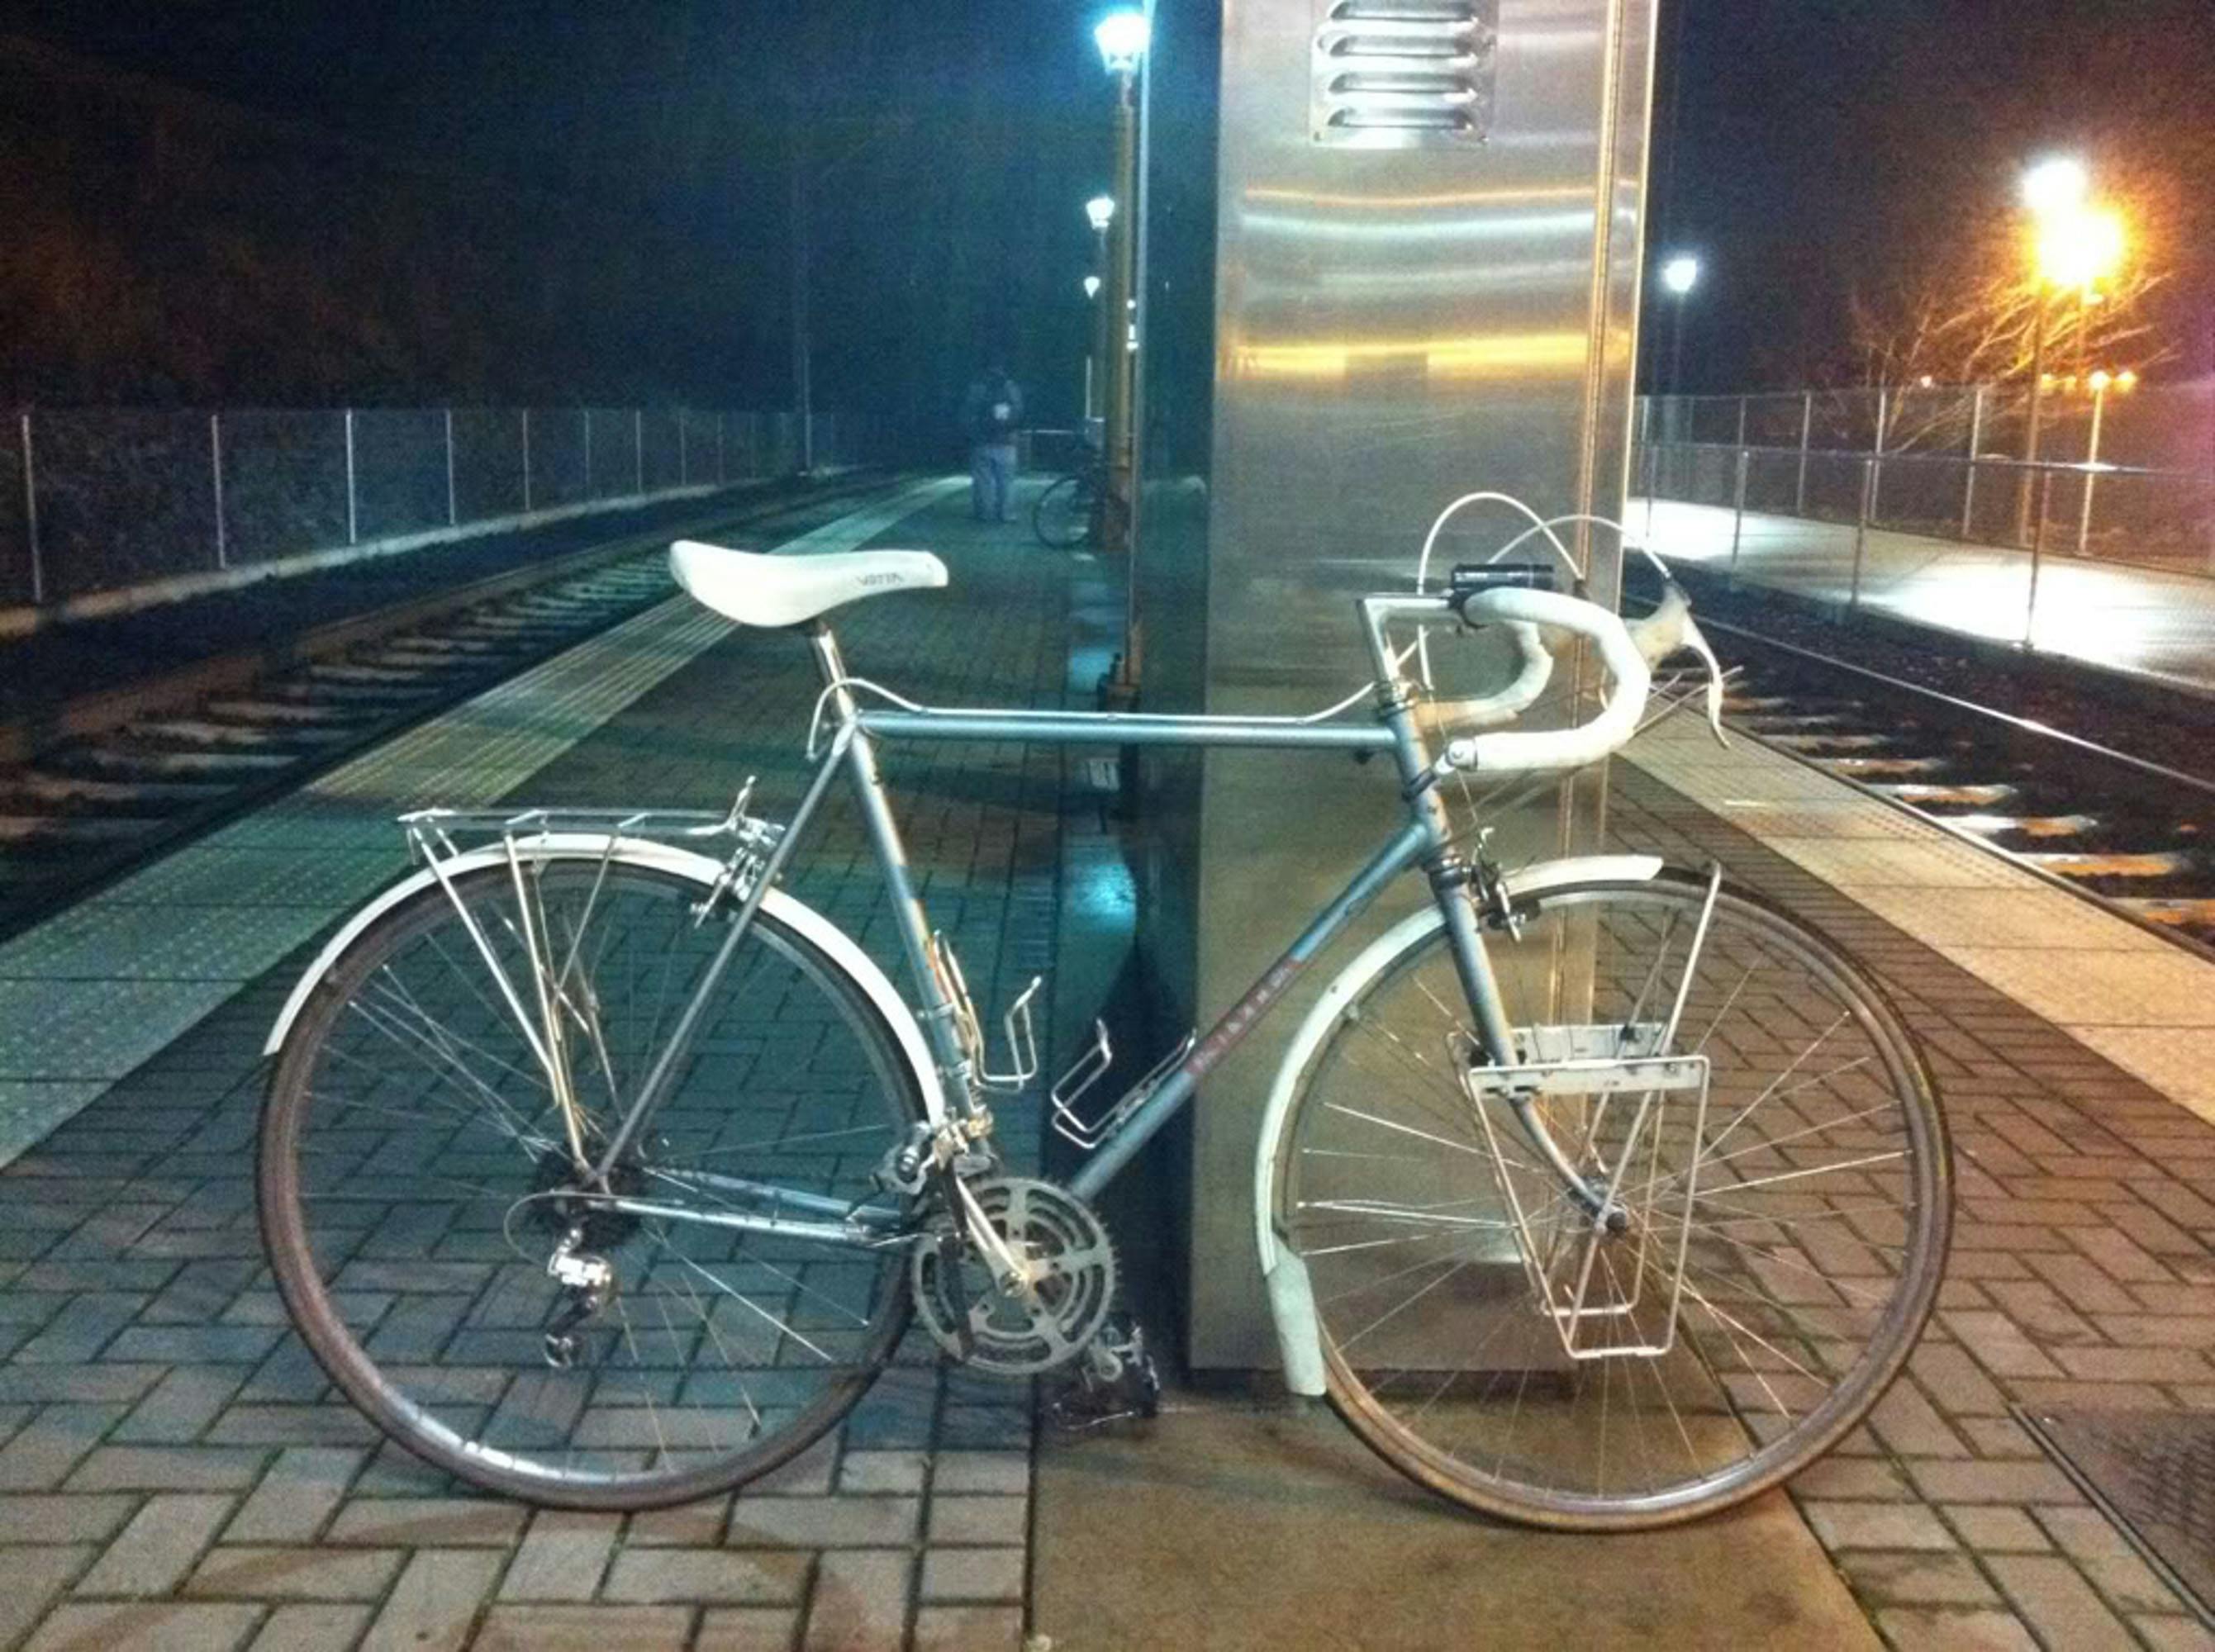 A commuter bike from the 80's.